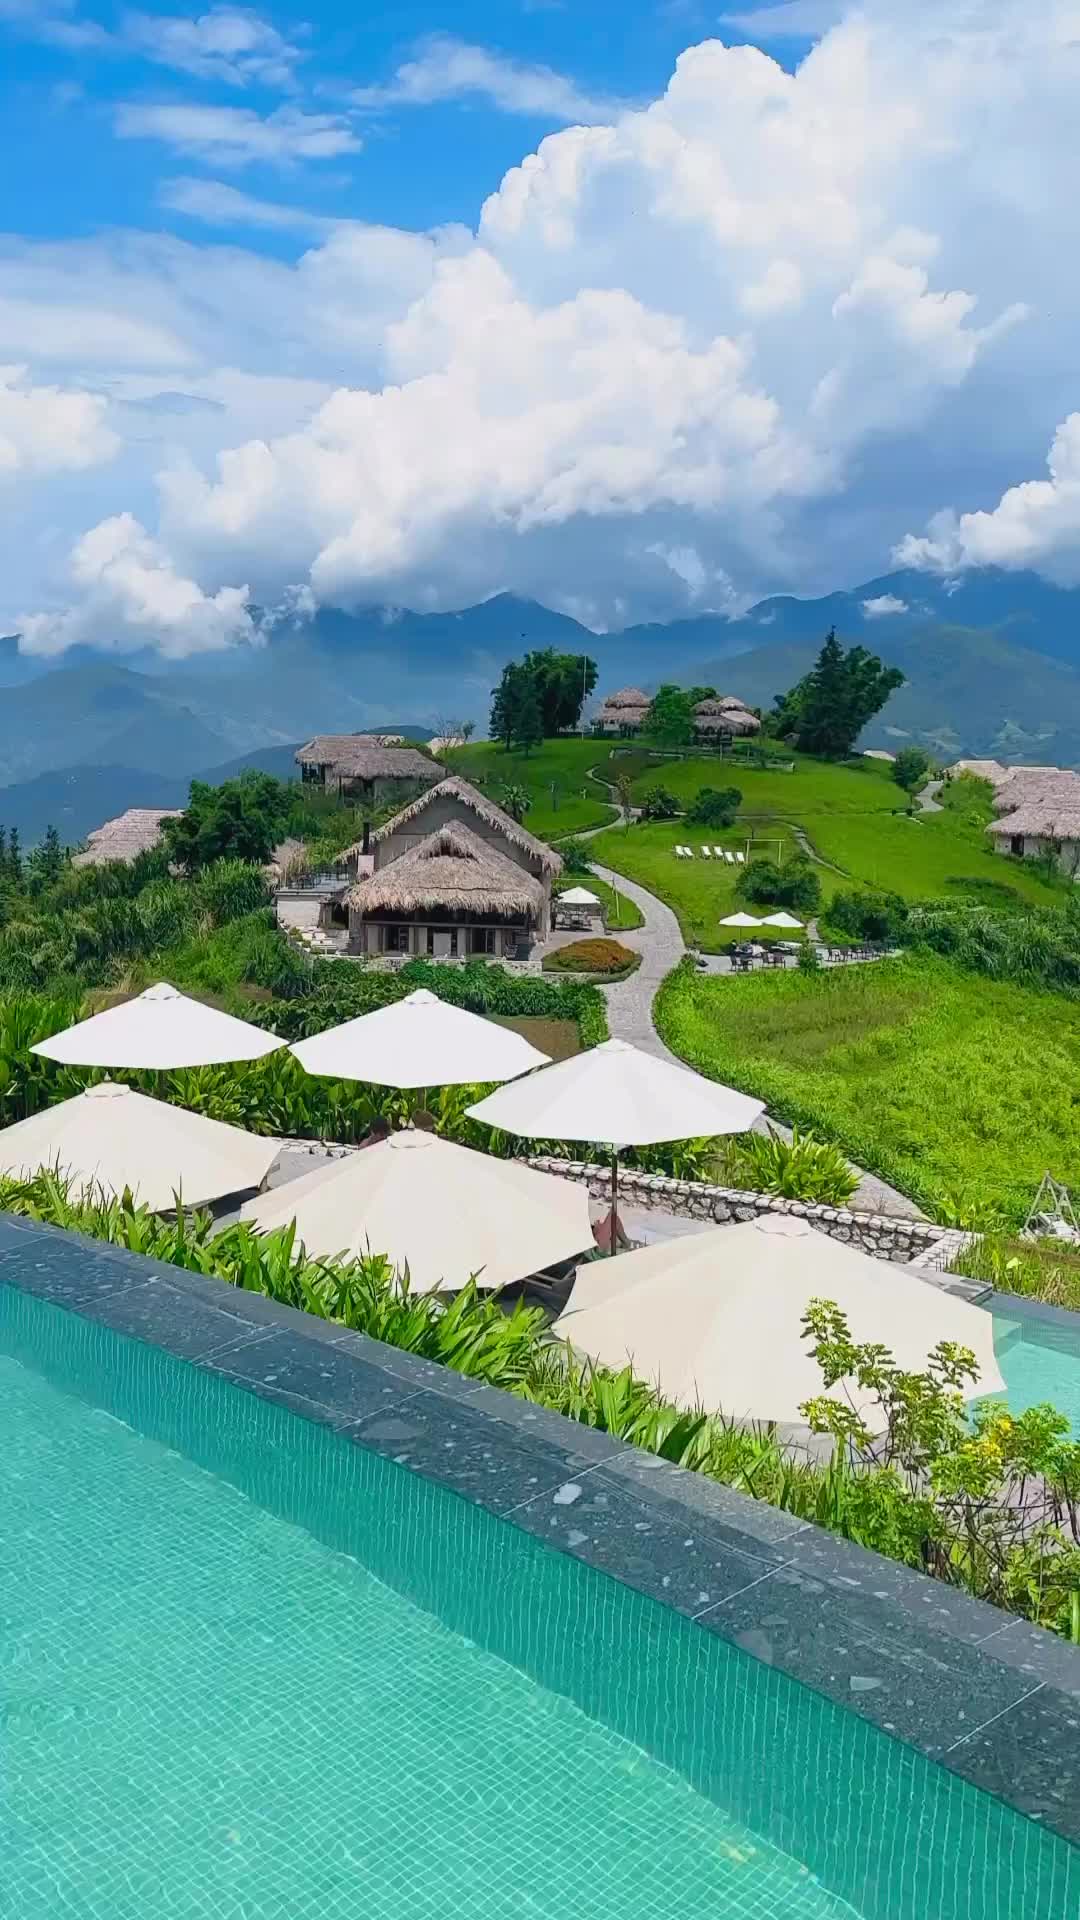 Magical Stay at Topas Ecolodge in Sapa, Vietnam